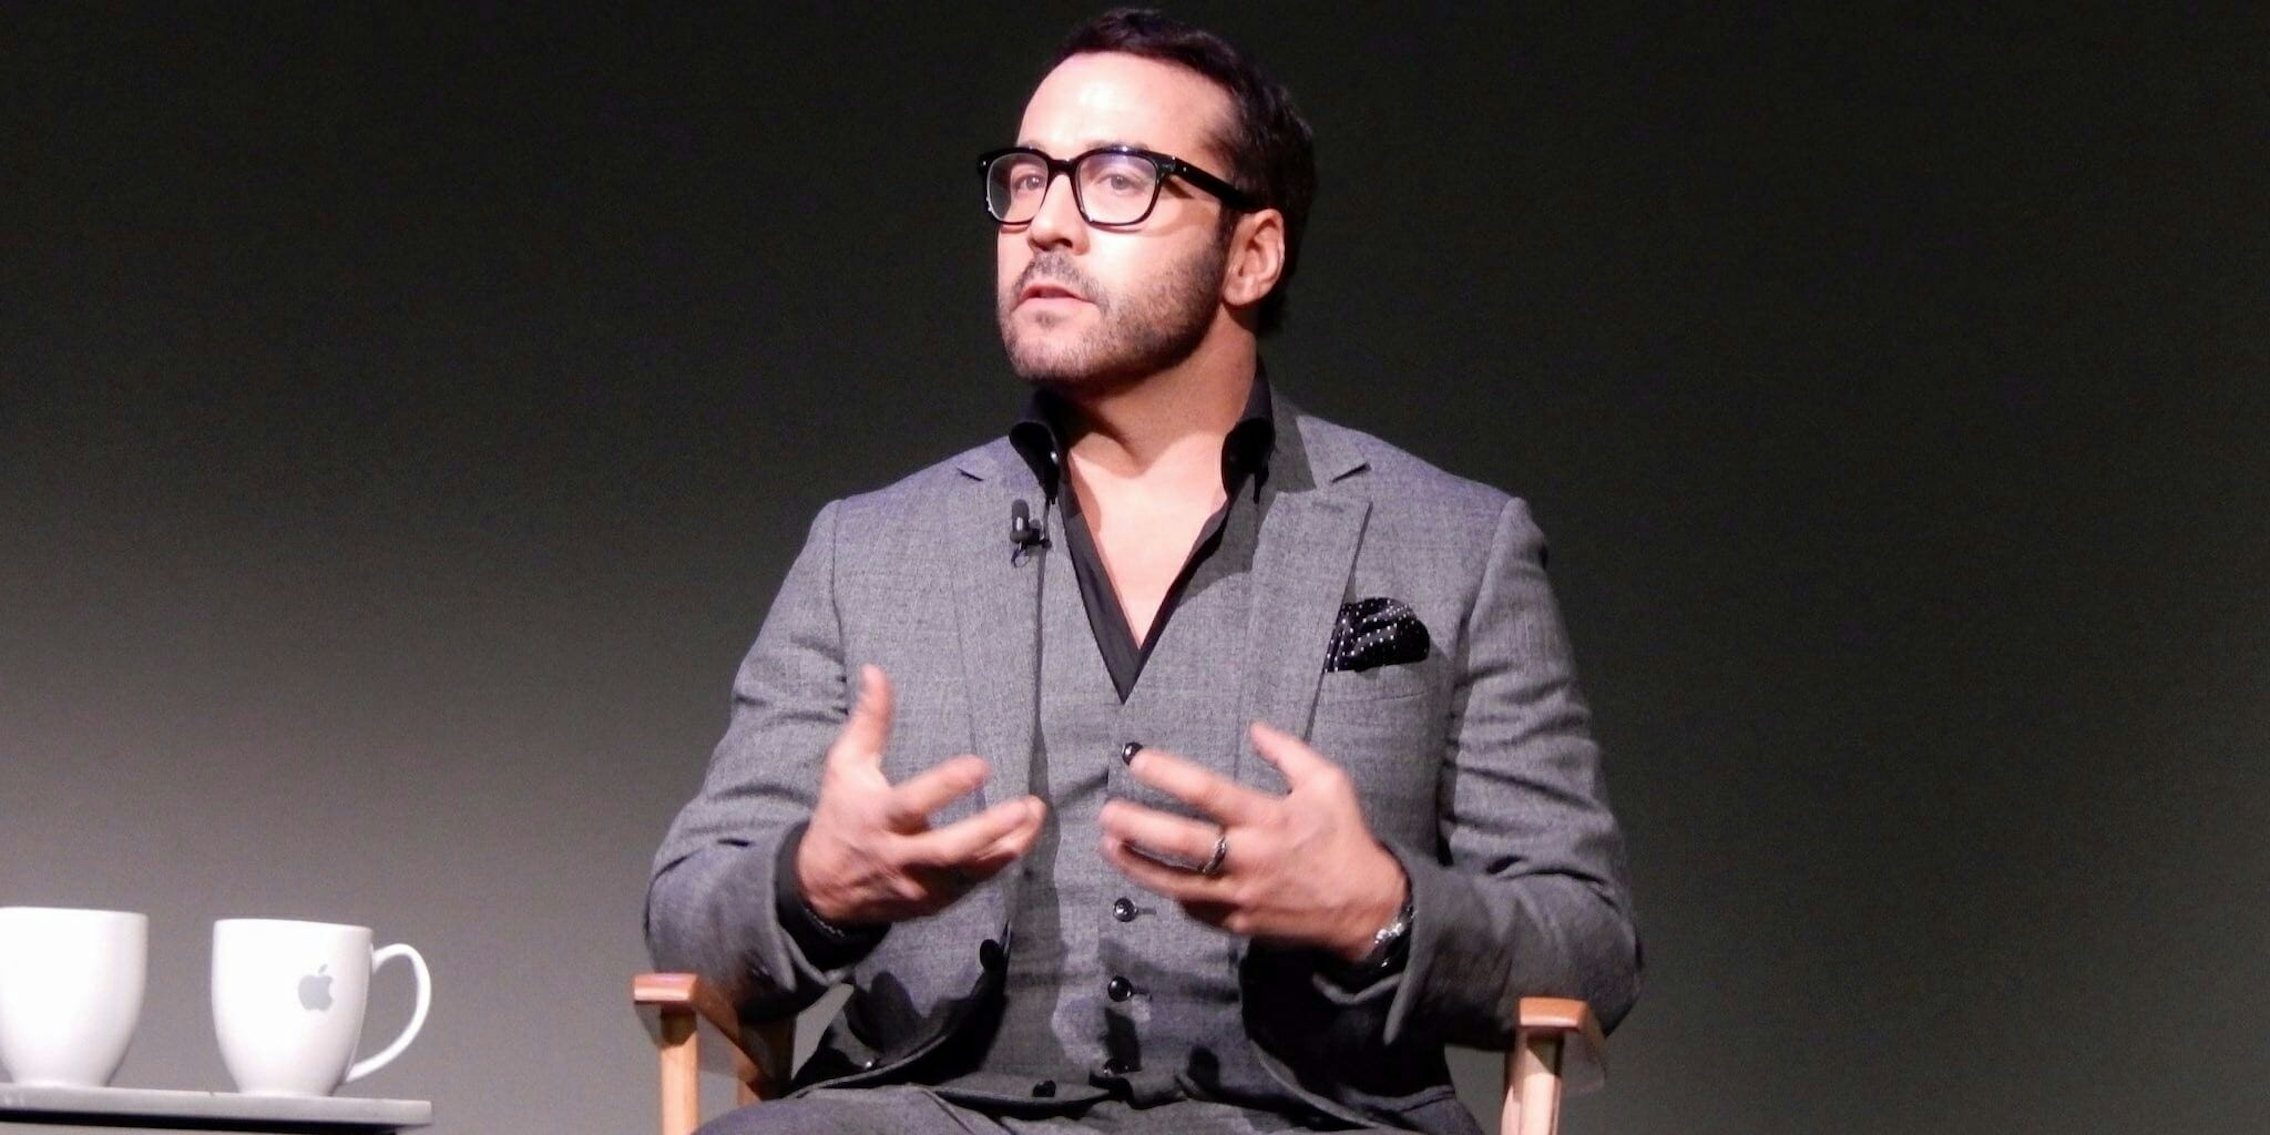 Jeremy Piven sexual assault accusations